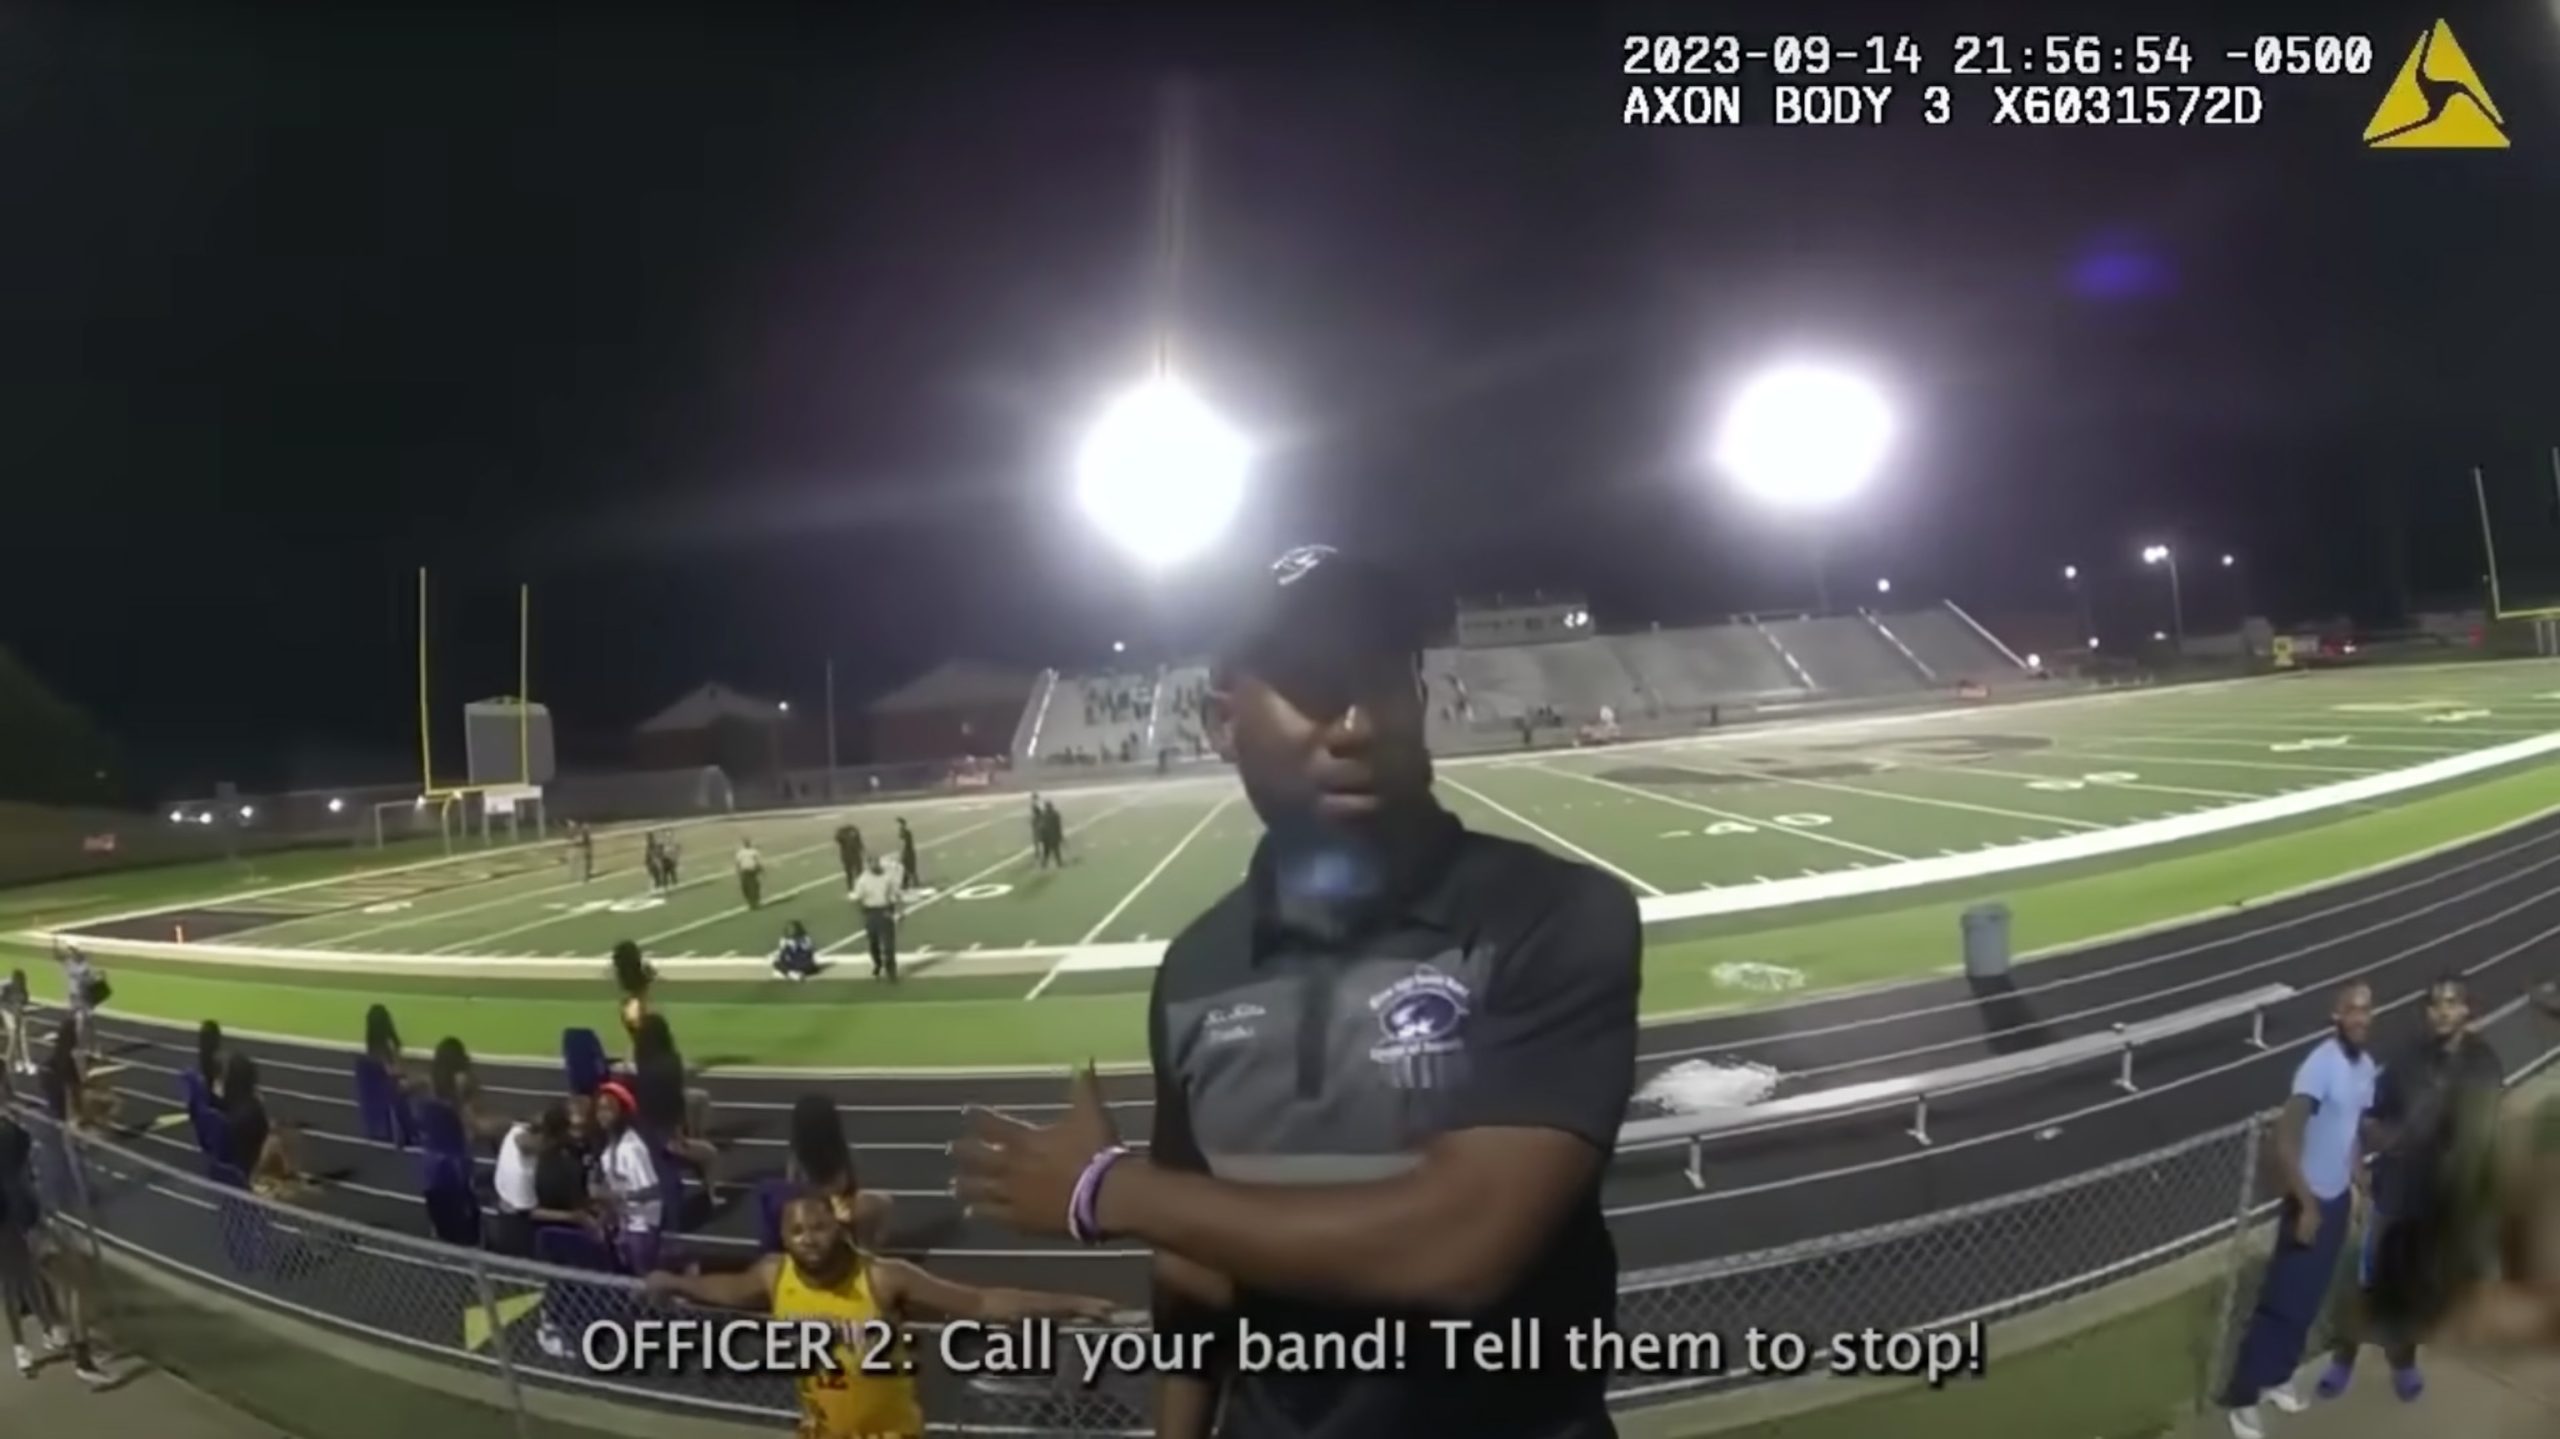 Release of Body Cam Footage Following Arrest of High School Band Director Stunned with Stun Gun